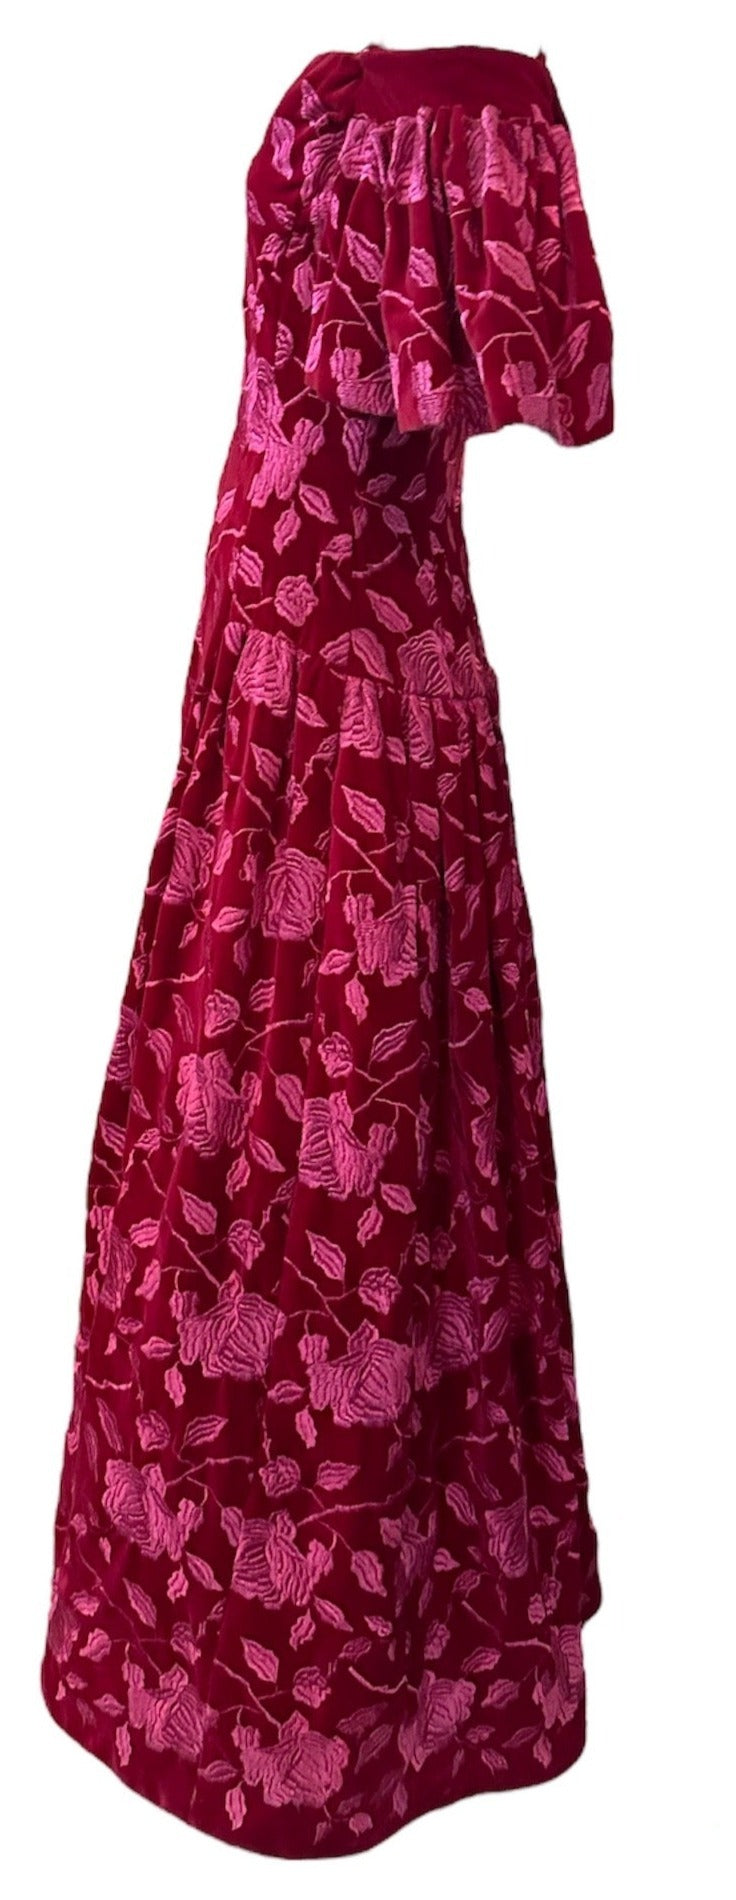 Arnold Scaasi 80s Red Velvet Gown with Pink Embroidery SIDE 2 of 6